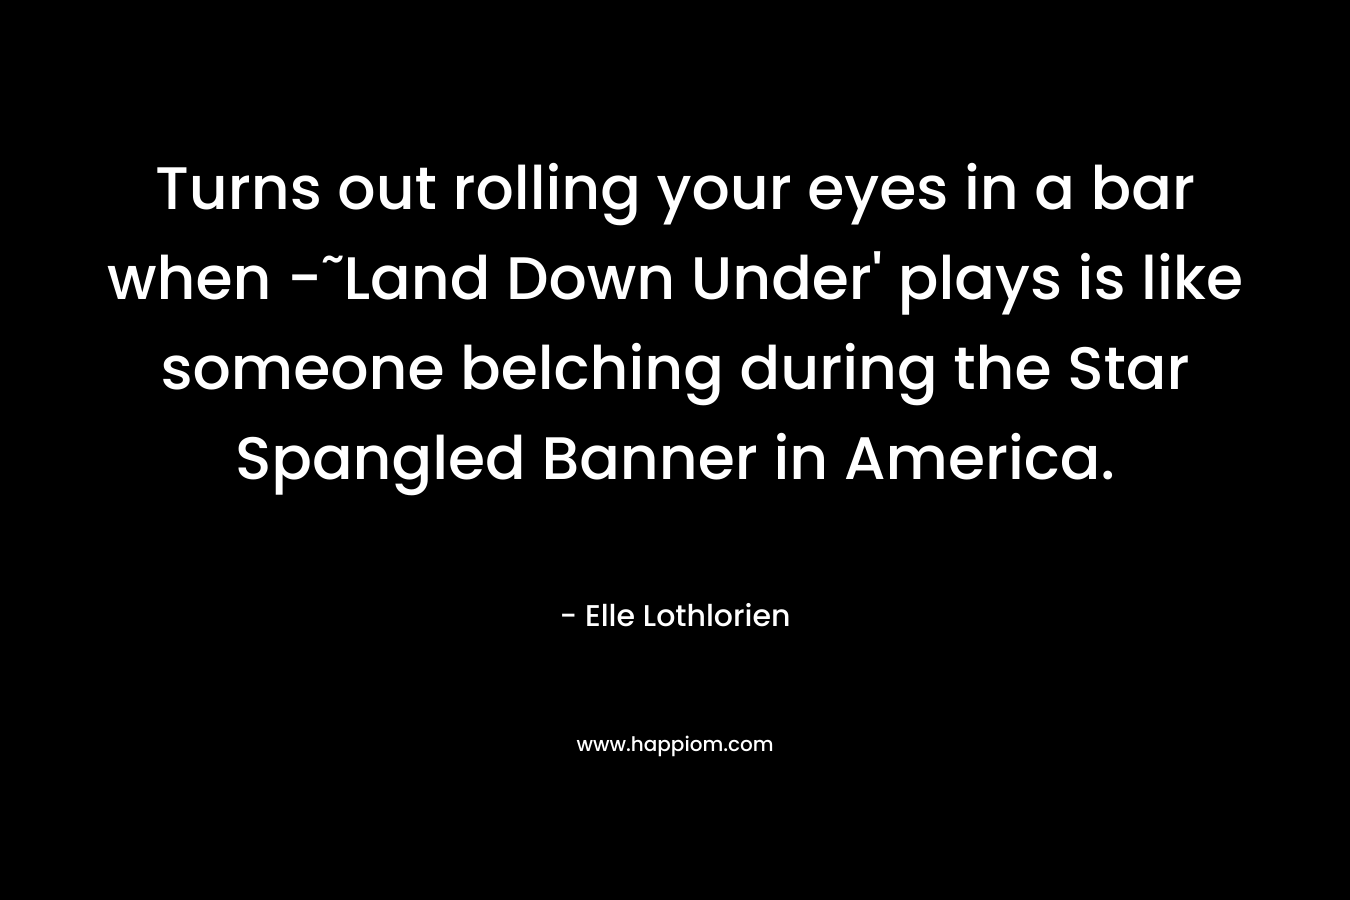 Turns out rolling your eyes in a bar when -˜Land Down Under’ plays is like someone belching during the Star Spangled Banner in America. – Elle Lothlorien